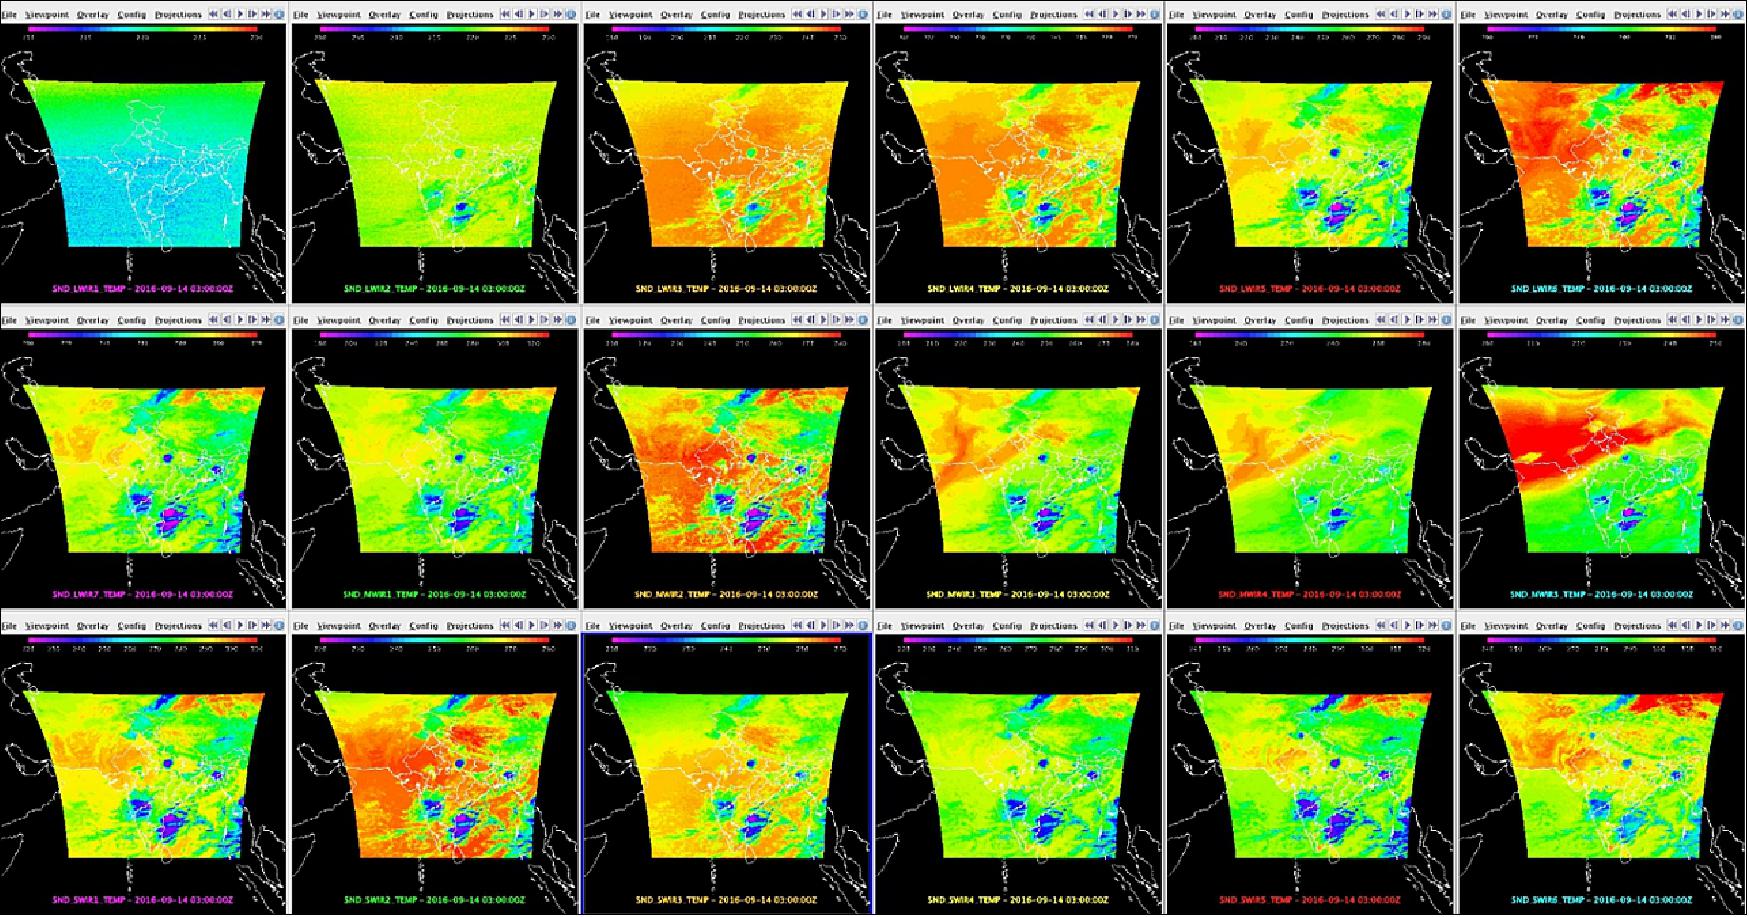 Figure 16: Sounder temperature maps in 18 IR channels (image credit: ISRO)